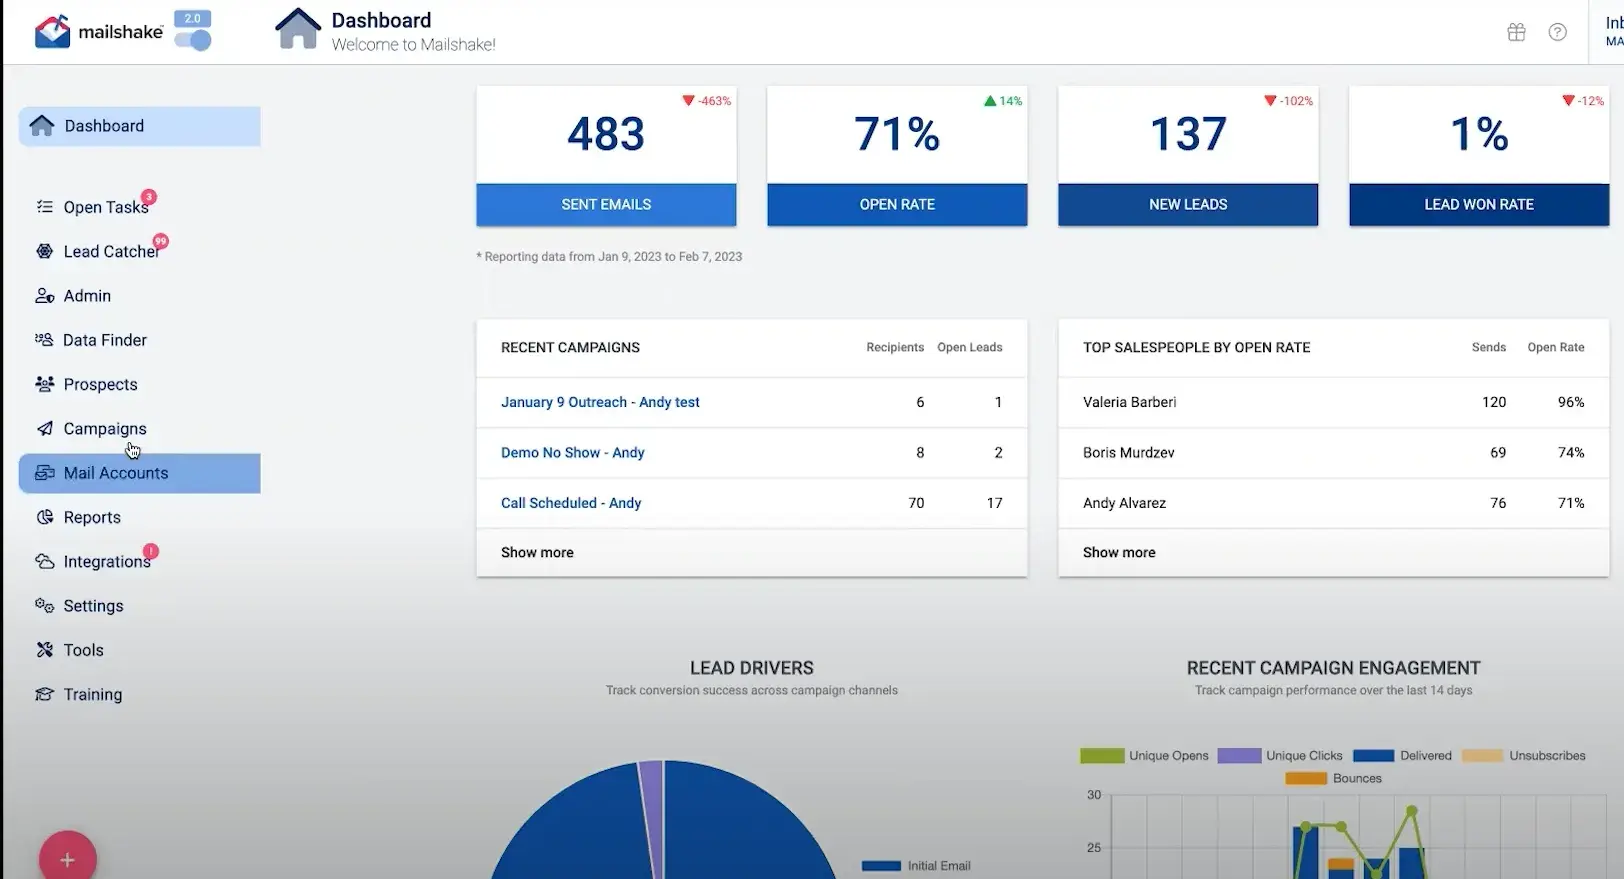 Screenshot of the Mailshake cold email tool dashboard displaying key metrics such as sent emails, open rate, new leads, and lead won rate, along with recent campaigns and top salespeople by open rate.